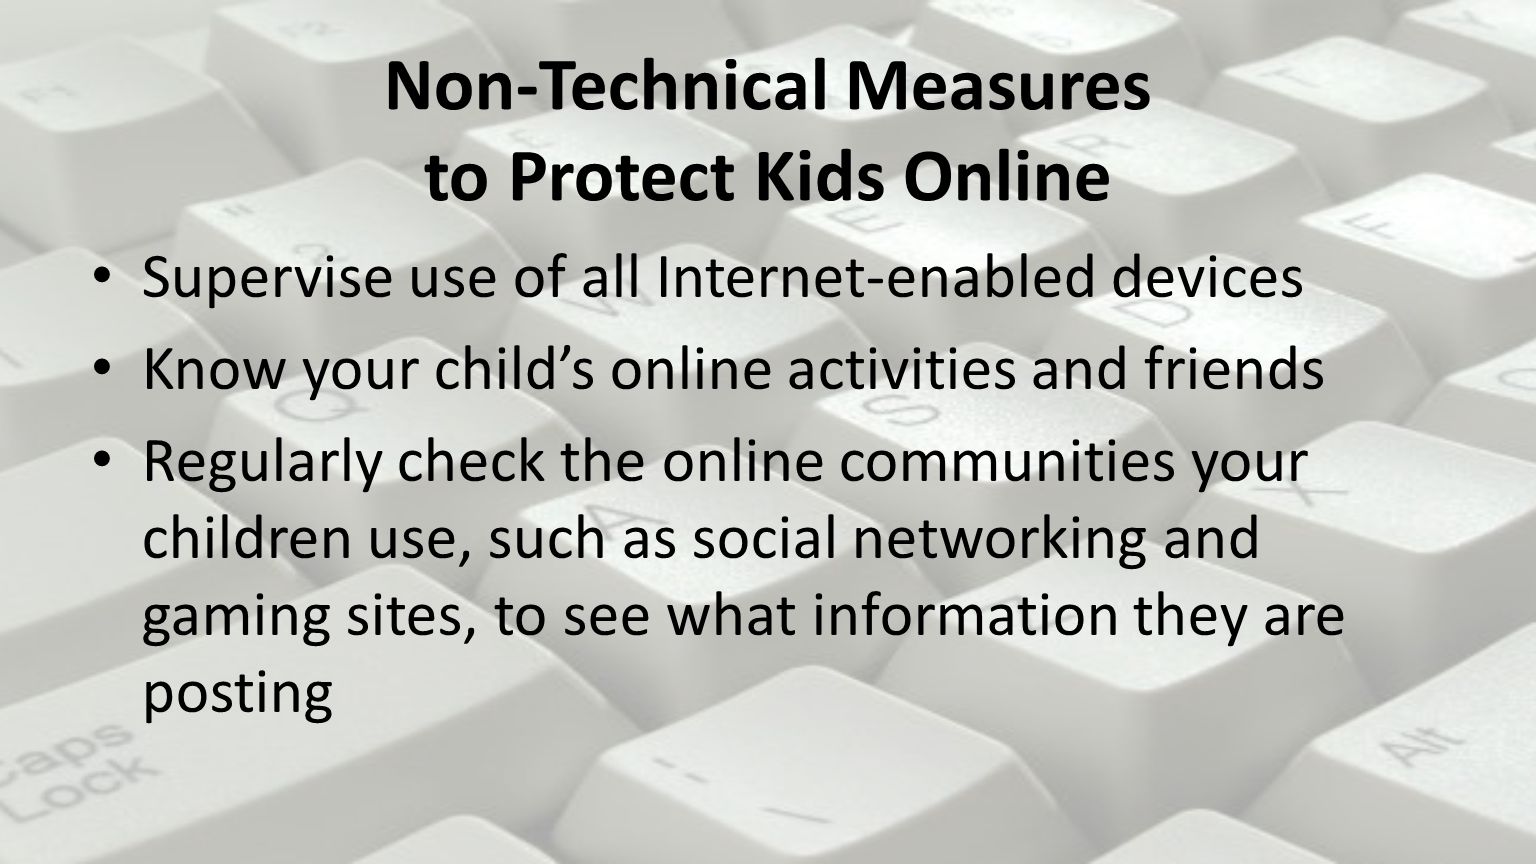 Non-Technical Measures to Protect Kids Online Supervise use of all Internet-enabled devices Know your child’s online activities and friends Regularly check the online communities your children use, such as social networking and gaming sites, to see what information they are posting